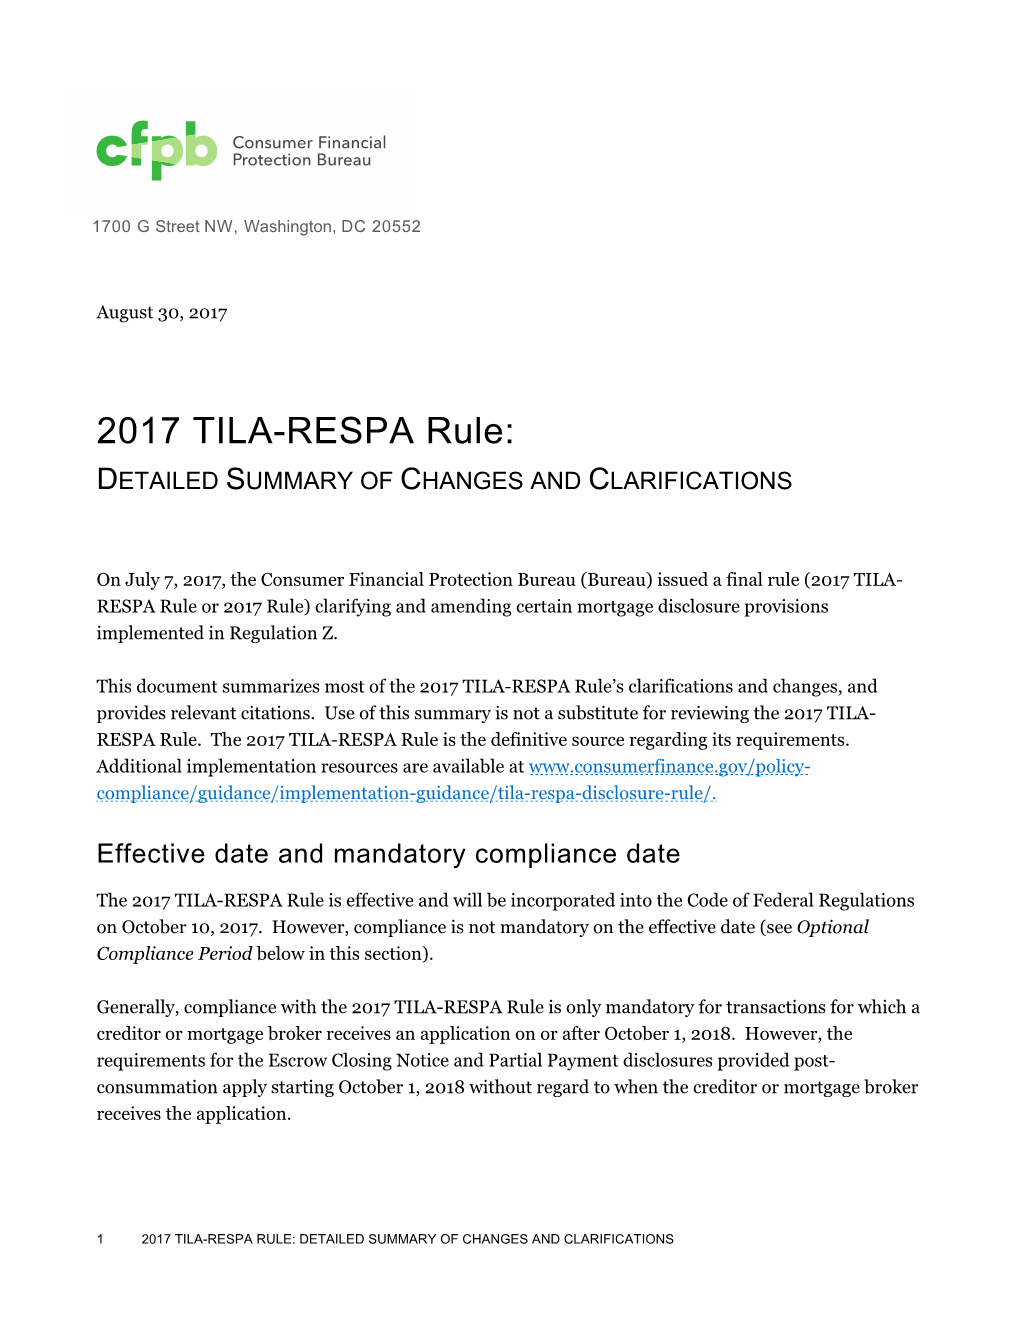 2017 TILA-RESPA Rule: DETAILED SUMMARY of CHANGES and CLARIFICATIONS